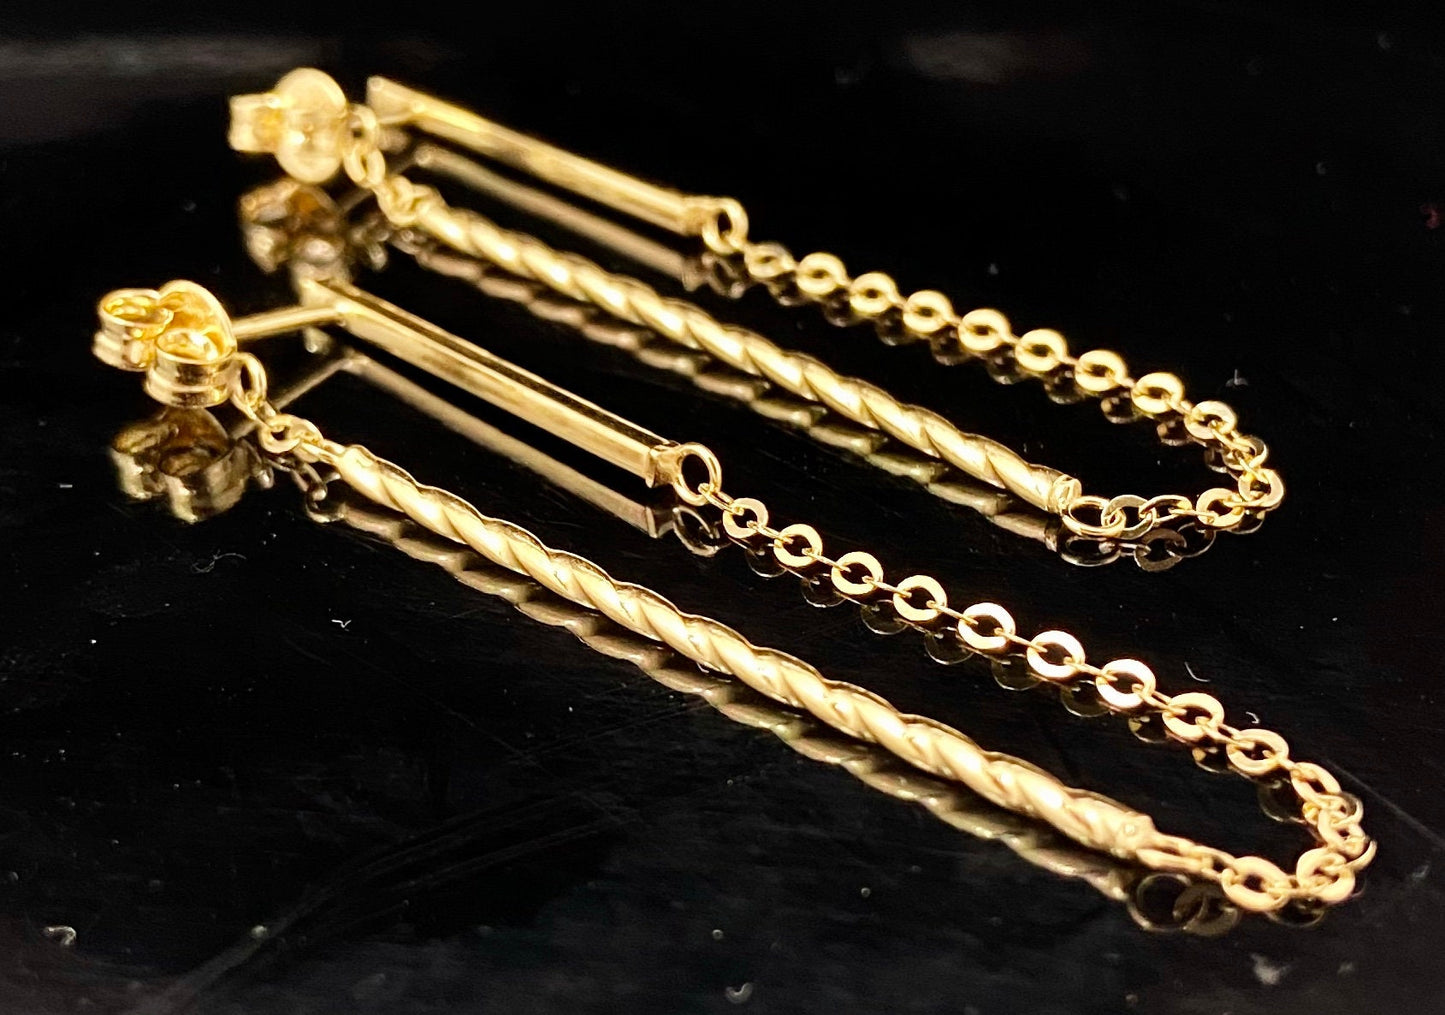 Yellow Gold Twisted Bar Chain Front Back Dangle Earrings